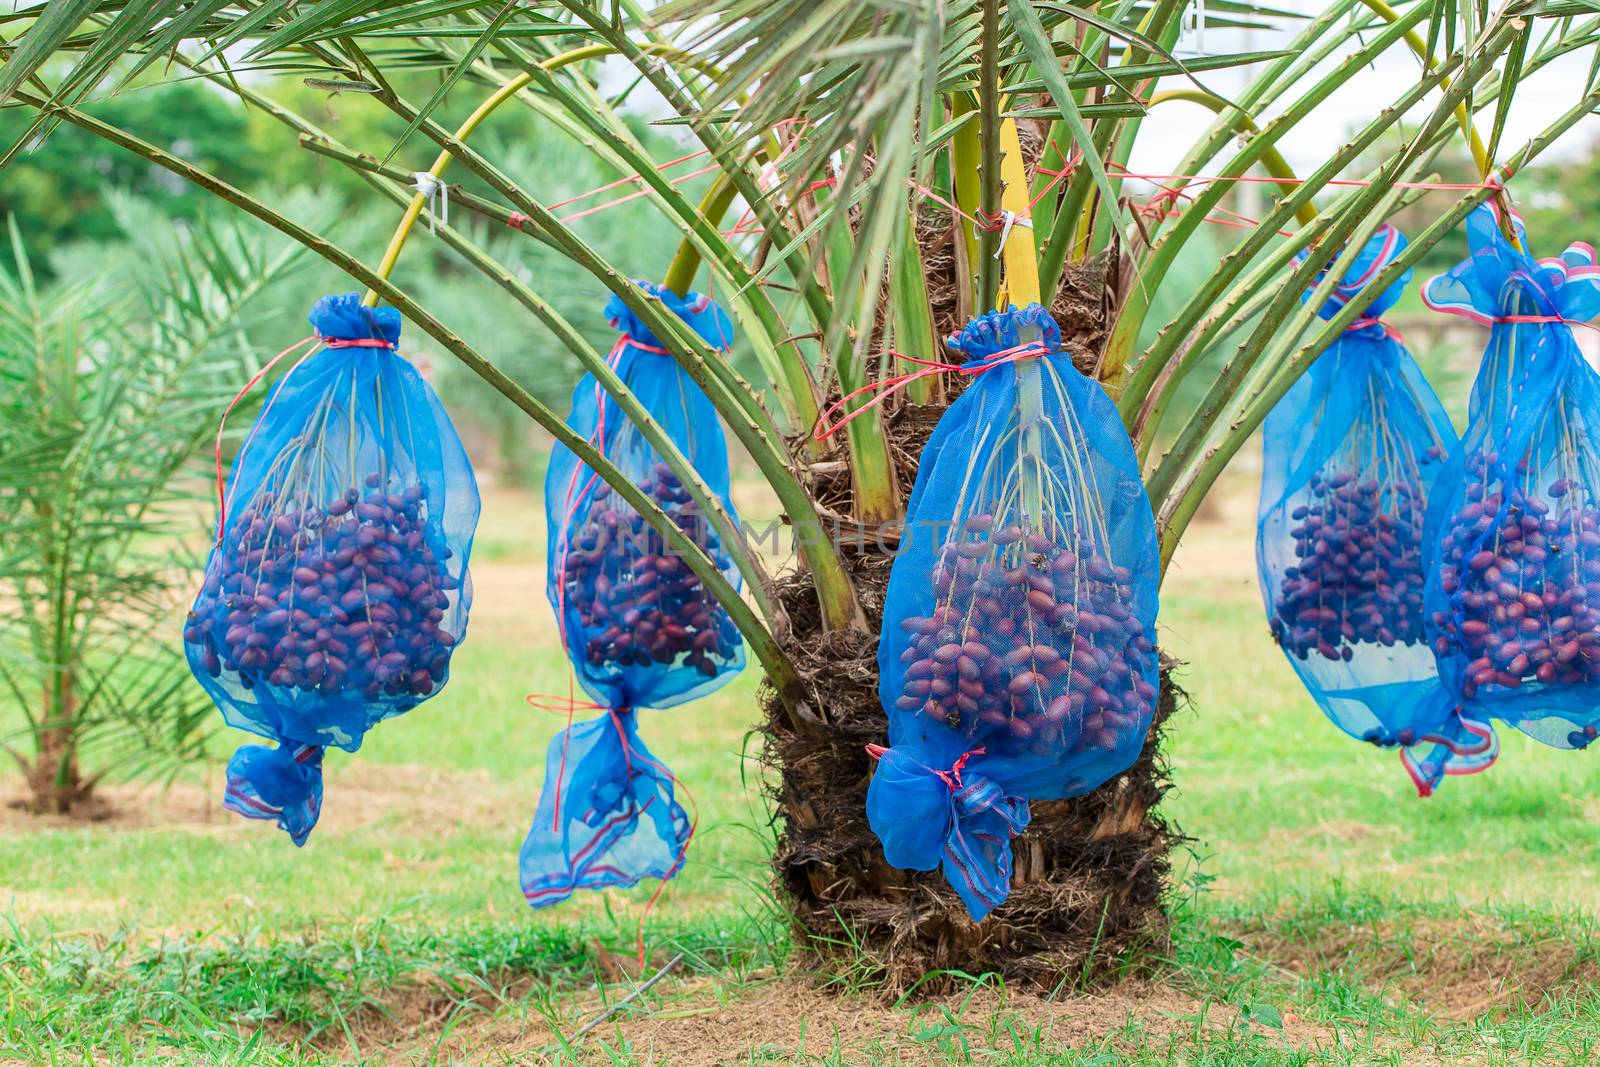 Dates palm branches with ripe dates by freedomnaruk